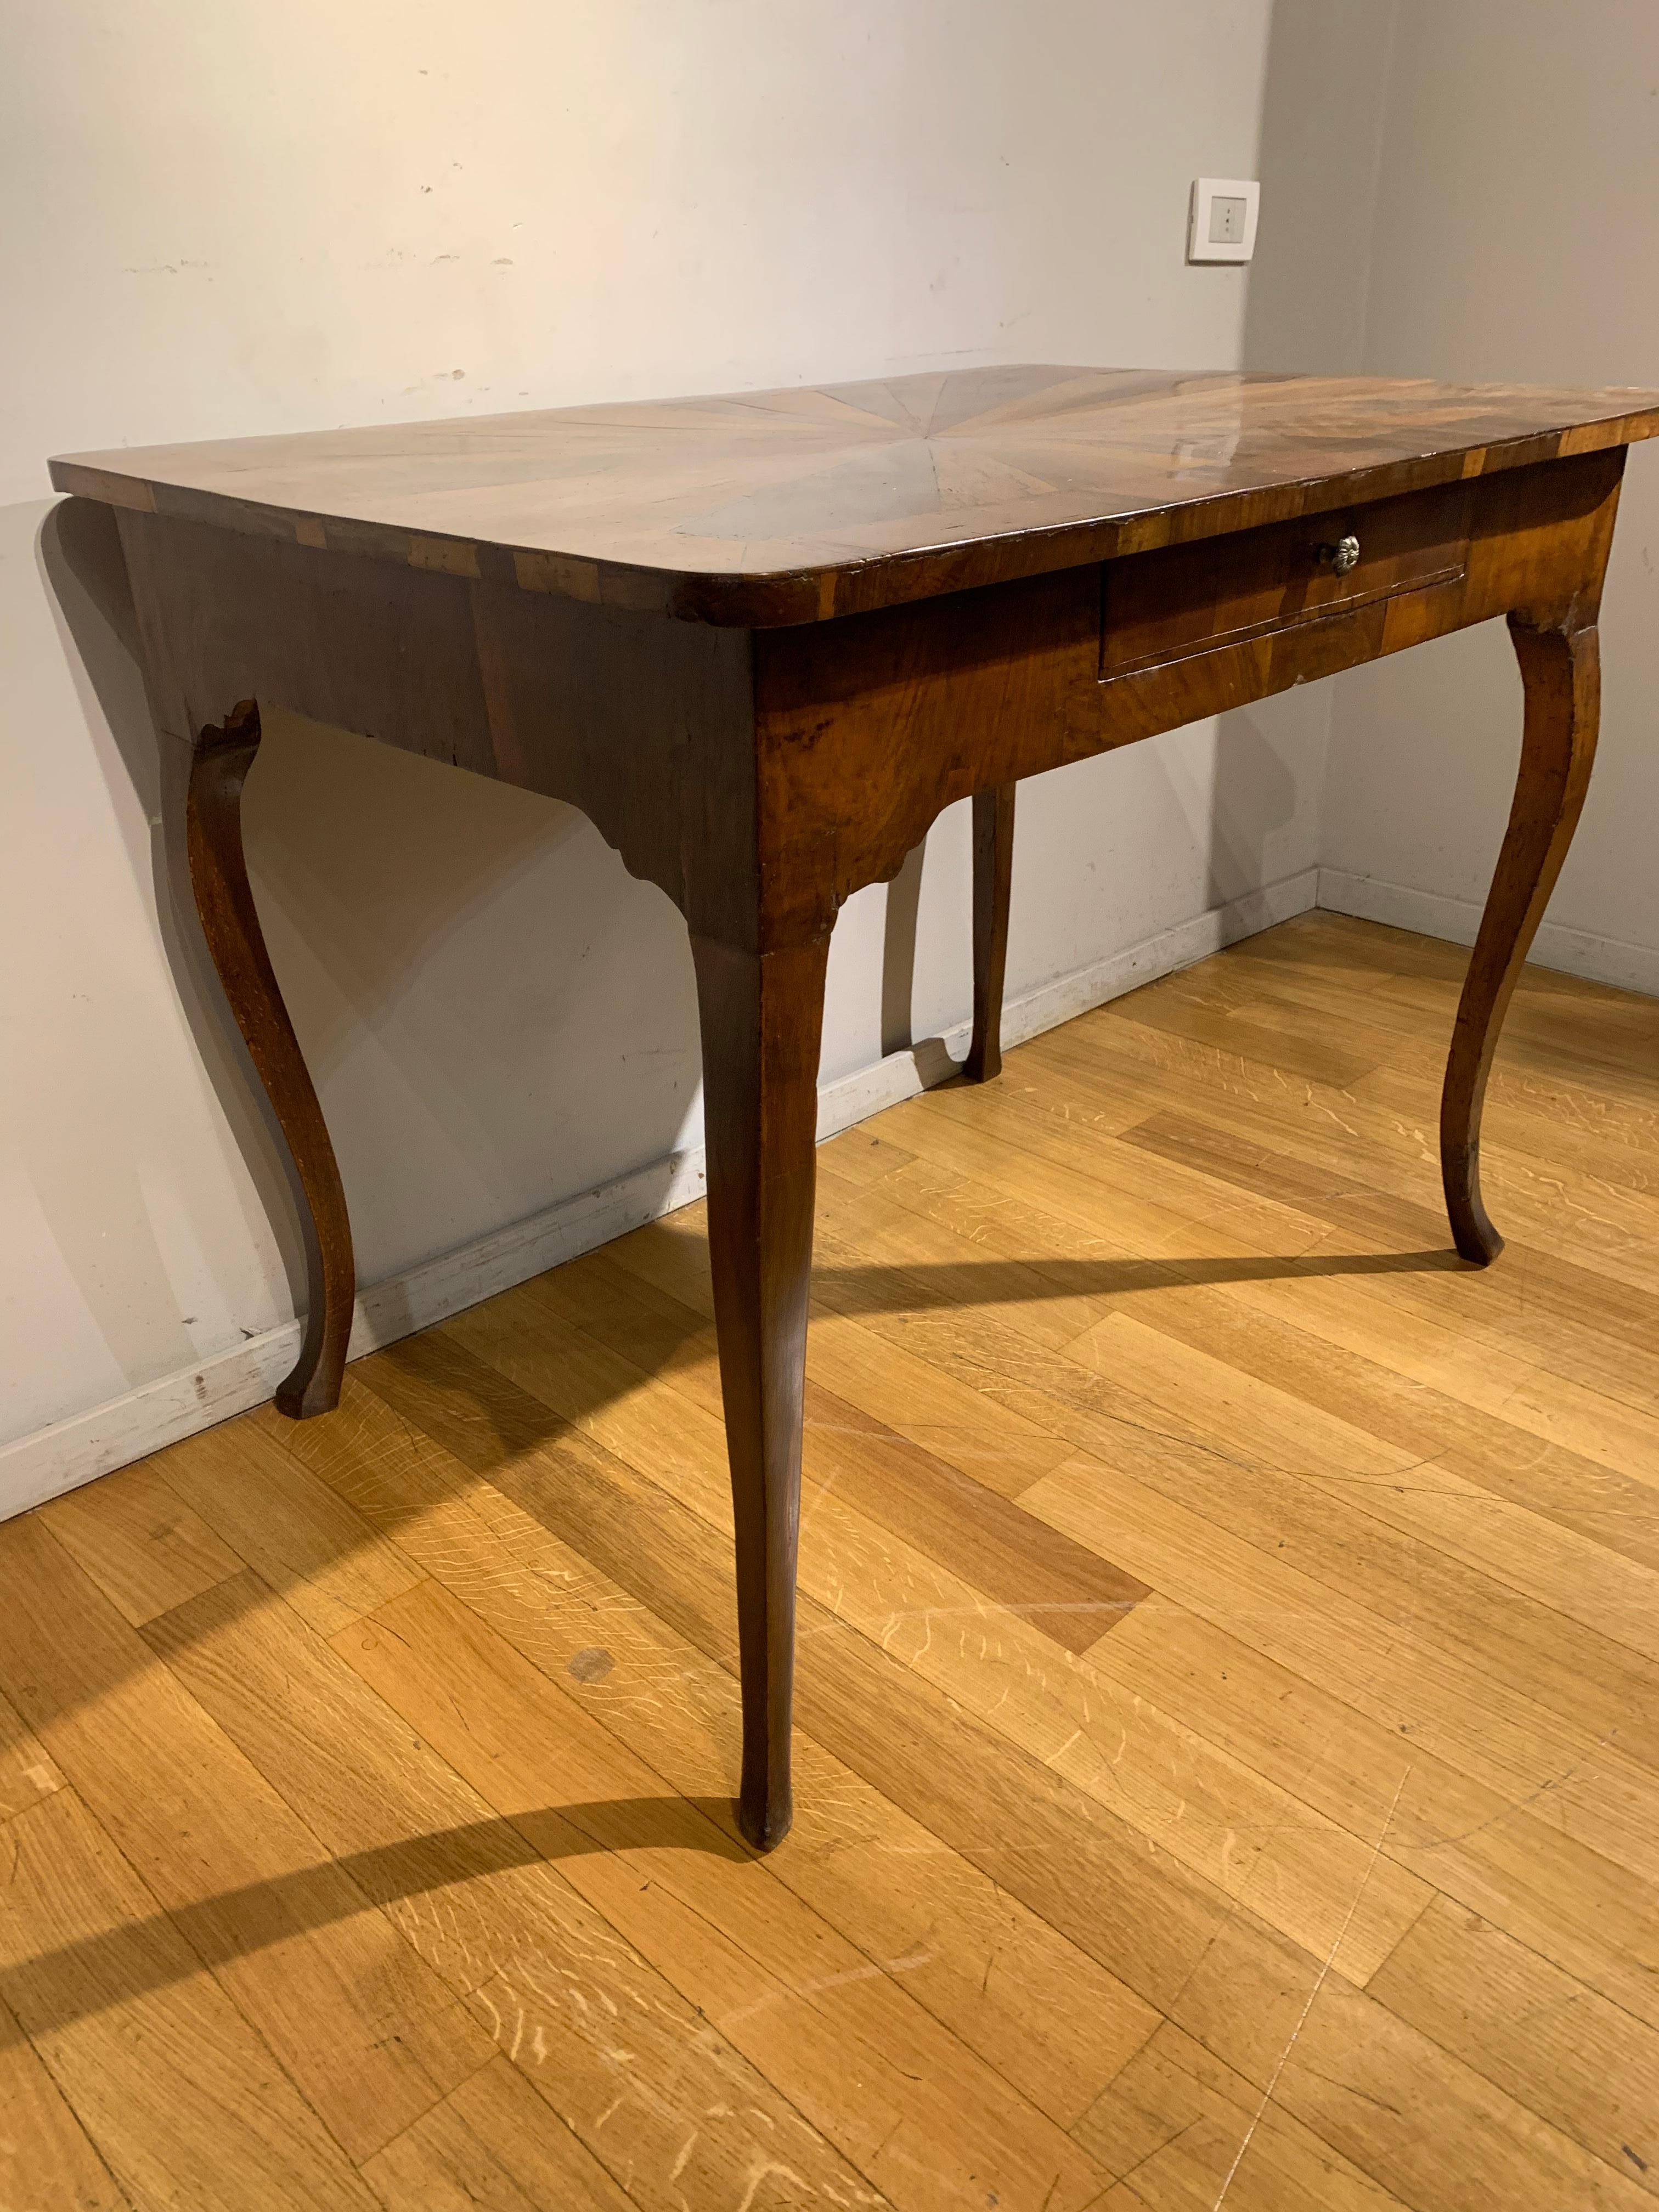 Elegant writing table in walnut veenered poplar. Top centered by a star motif, a comfortable drawer in the band, curved legs typical of mid-18th century Tuscan manufacture.